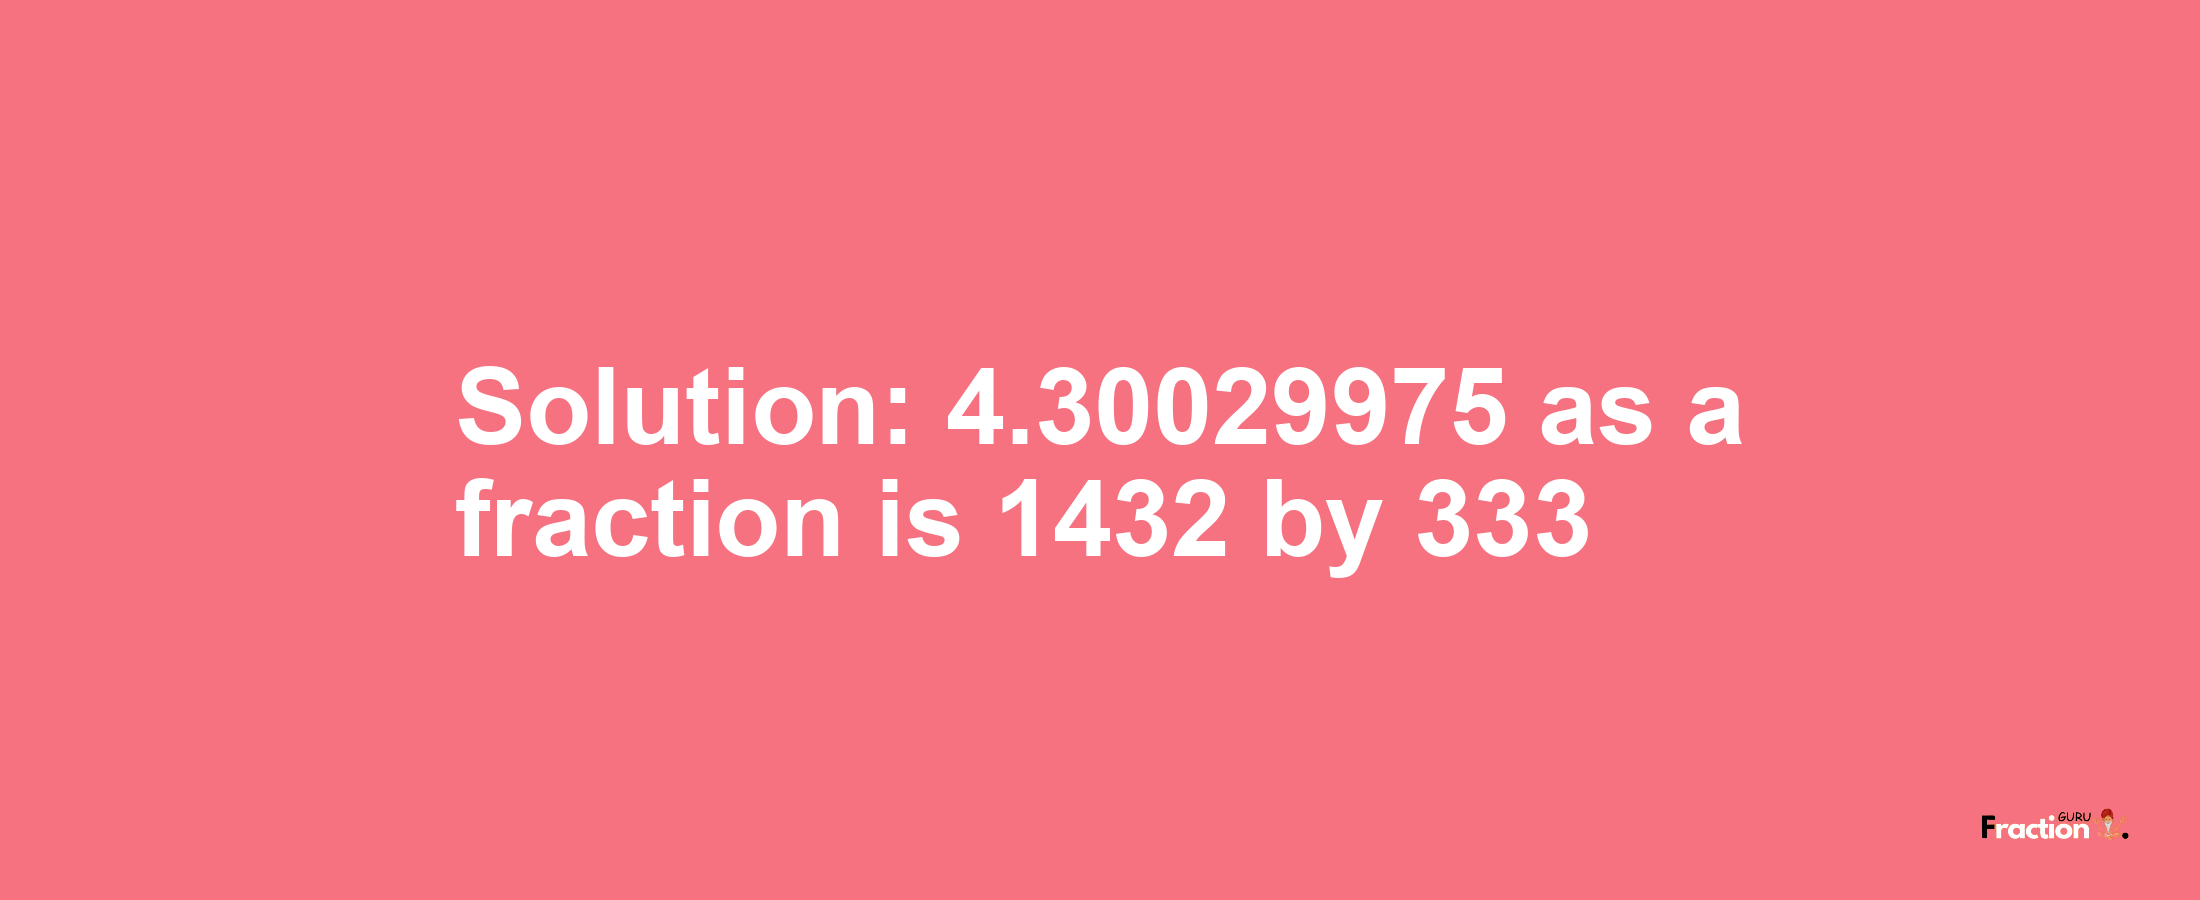 Solution:4.30029975 as a fraction is 1432/333